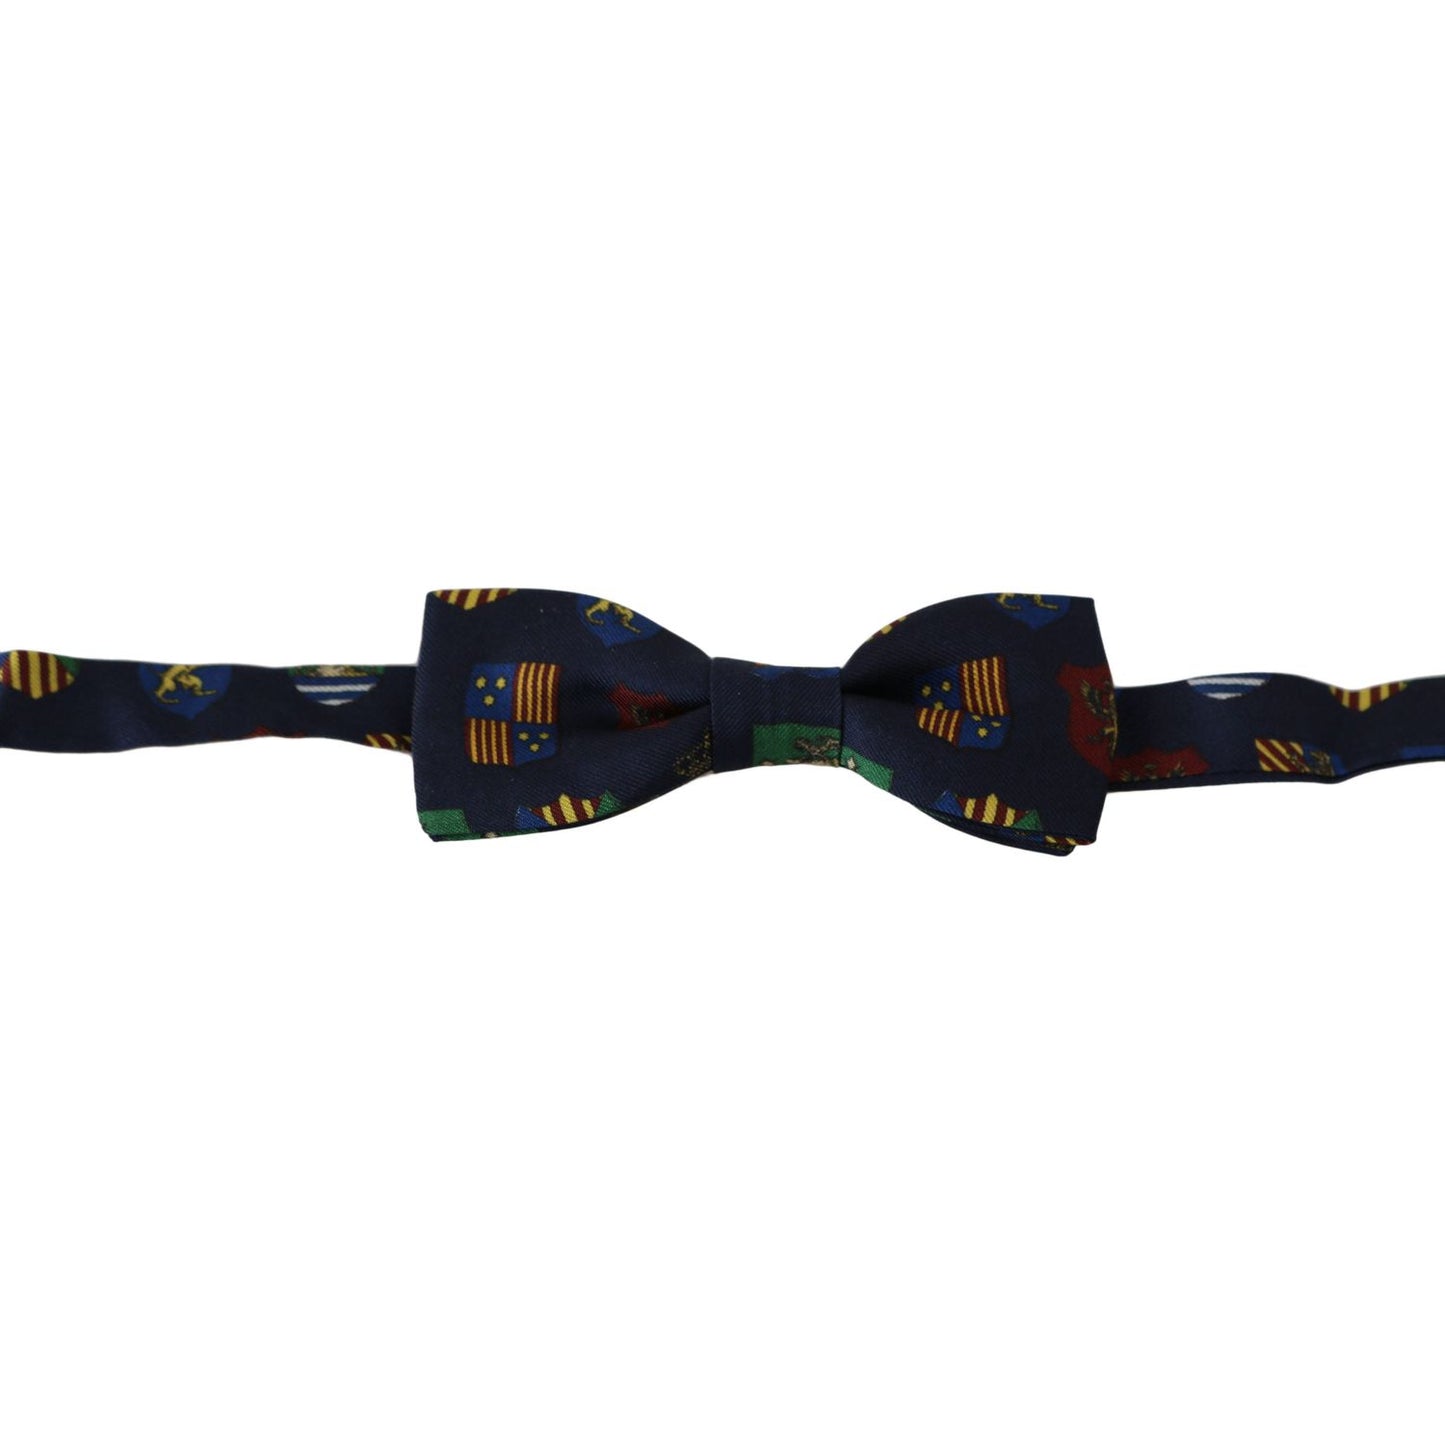 Dolce & Gabbana Exquisite Silk Bow Tie in Blue Flags Print blue-flags-100-silk-adjustable-neck-papillon-men-bow-tie Bow Tie